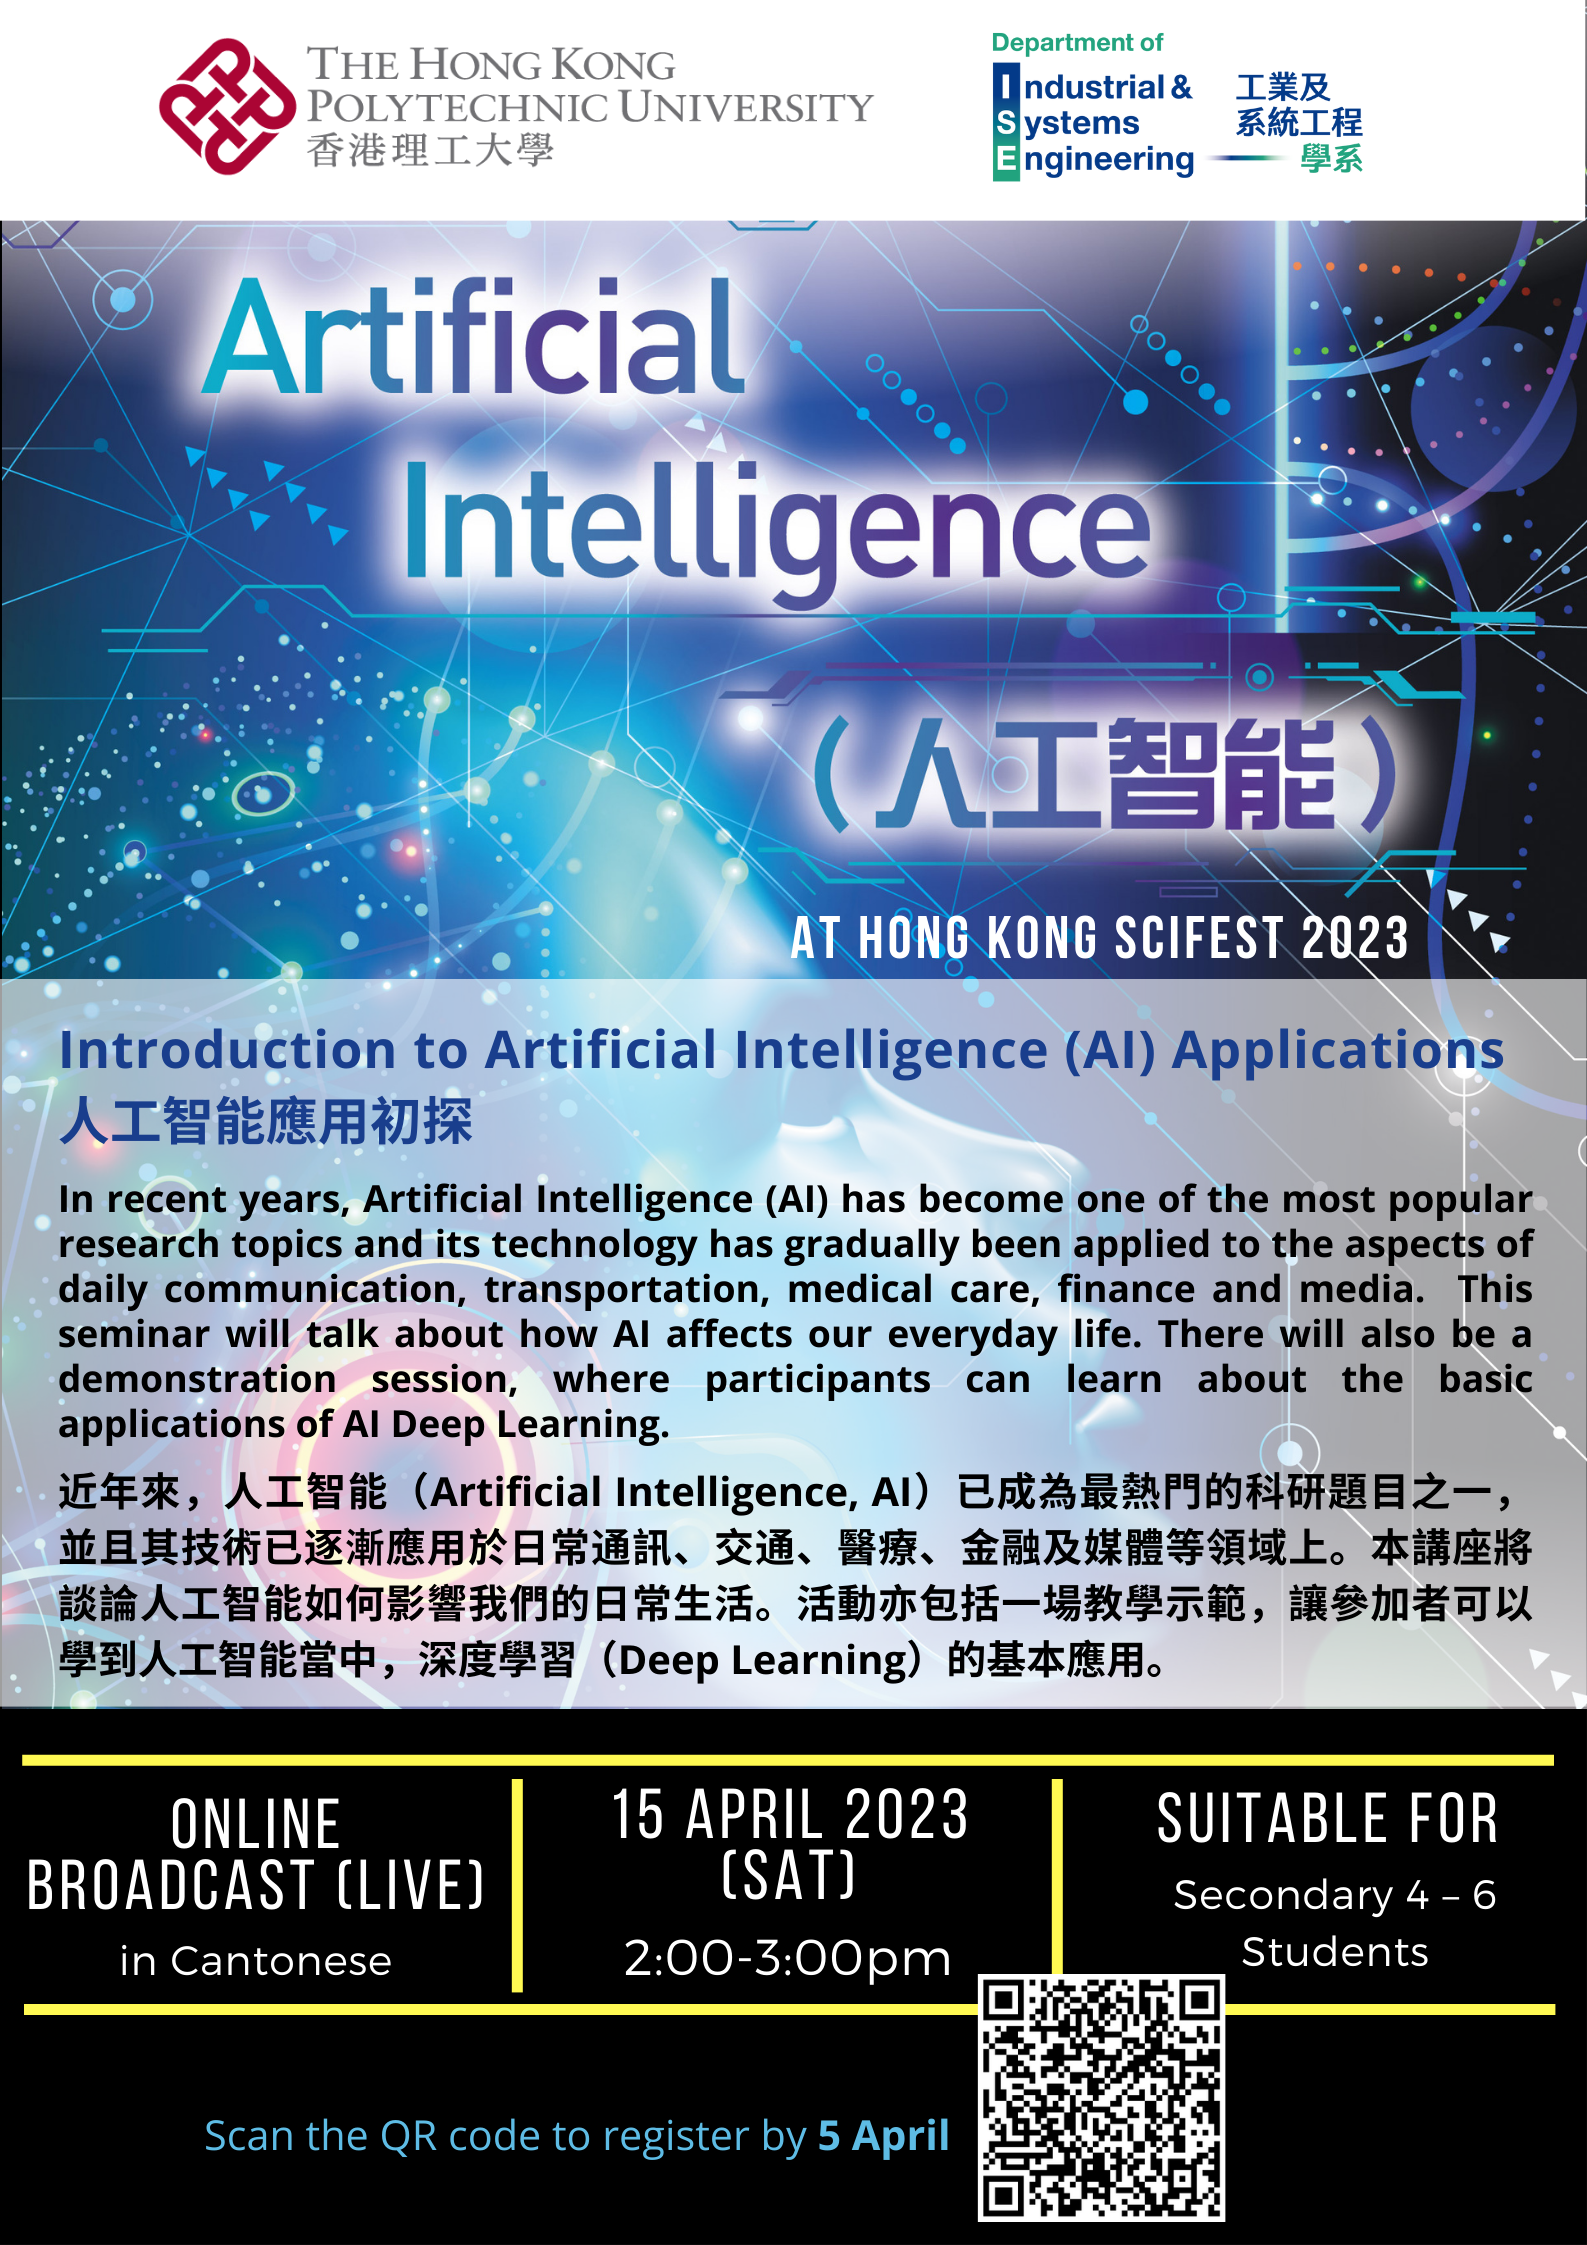 Introduction to Artificial Intelligence AI Applications2023